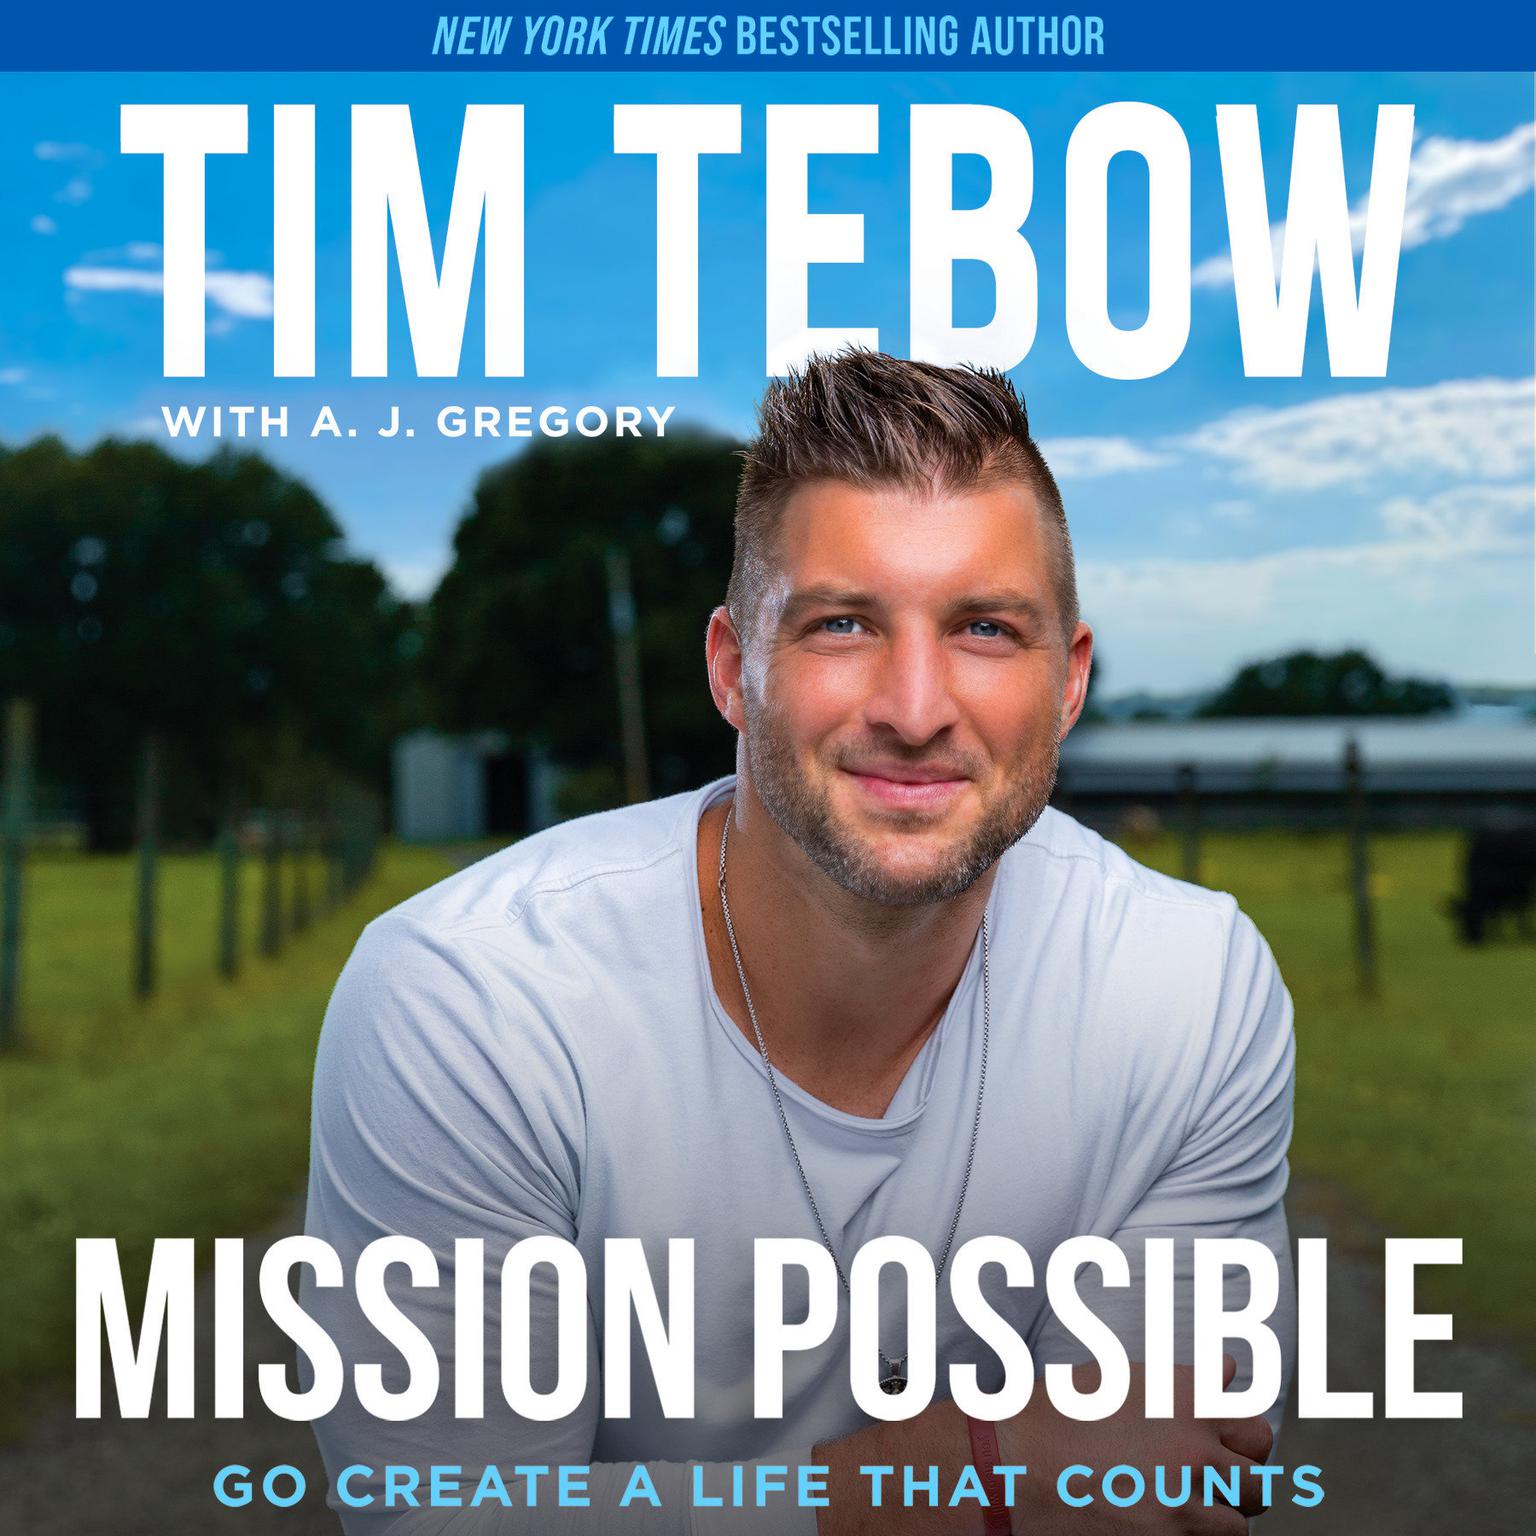 Mission Possible: Go Create a Life That Counts Audiobook, by Tim Tebow